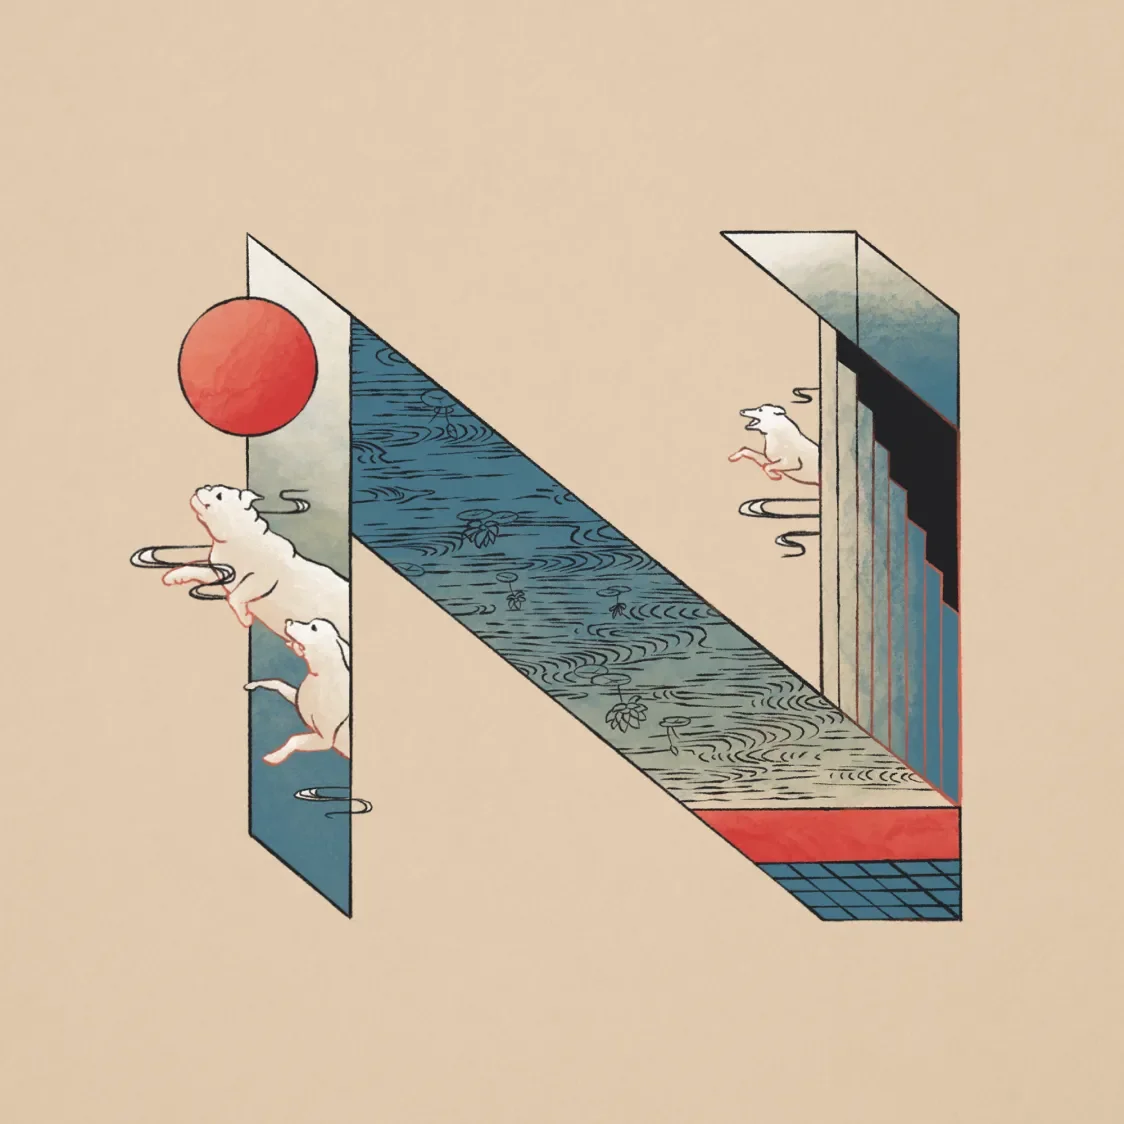 The letter 'n' comprised of a sideways decending staircase, an upside down pool and a sun with three dogs jumping out of the sides towards the west